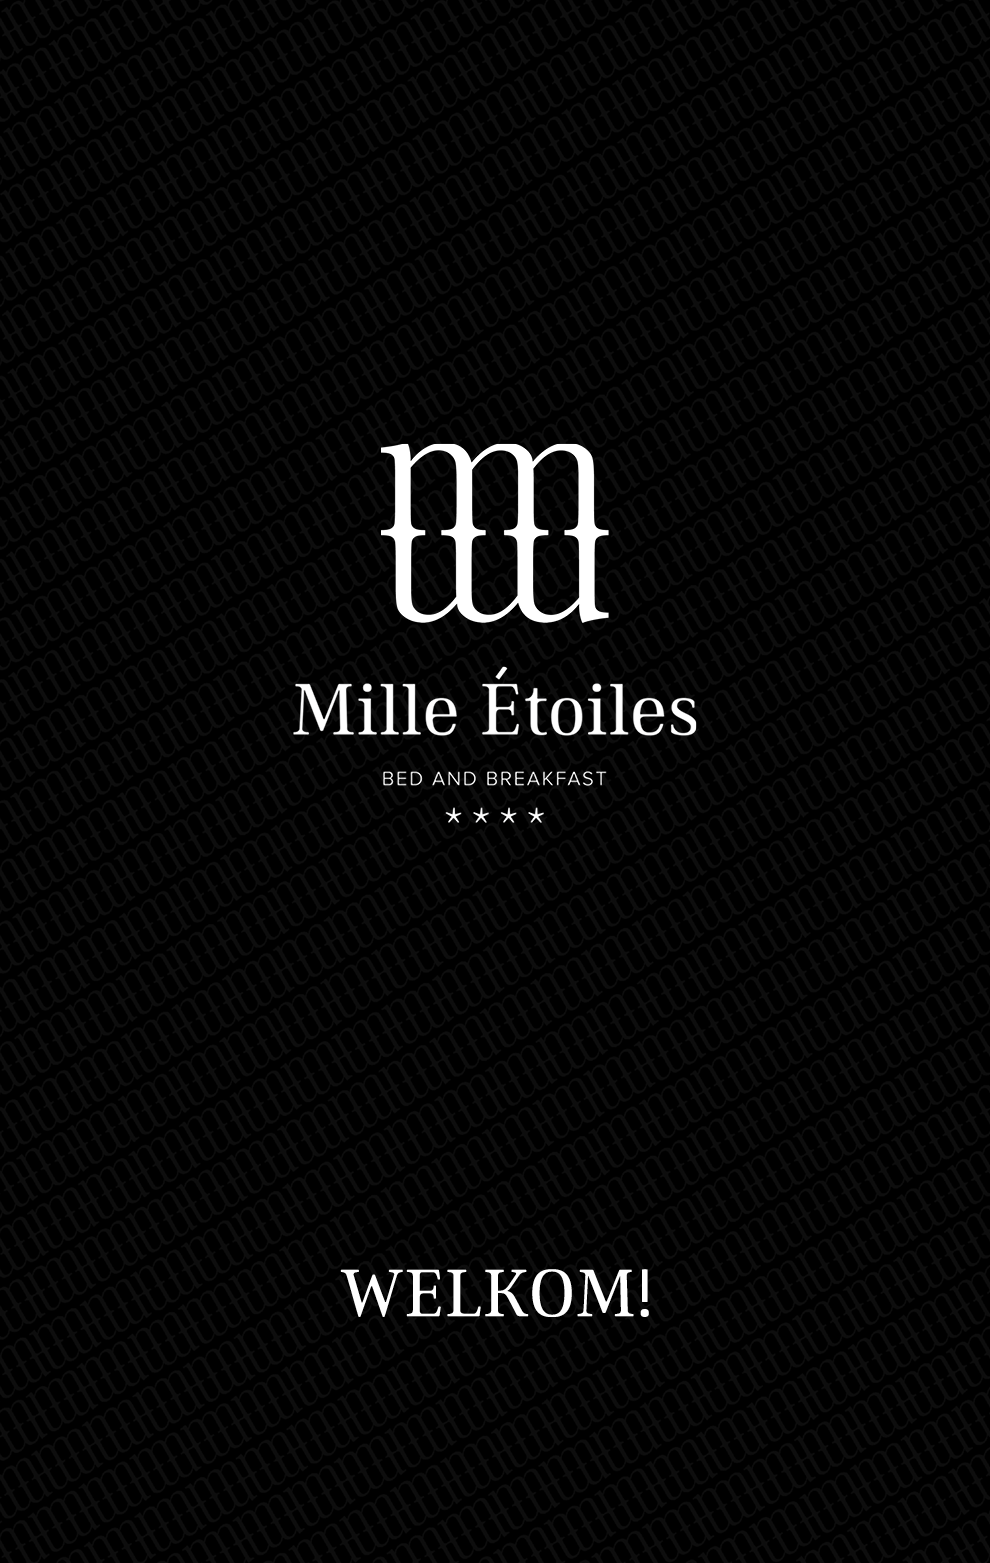 mille-etoiles-home-over-ons